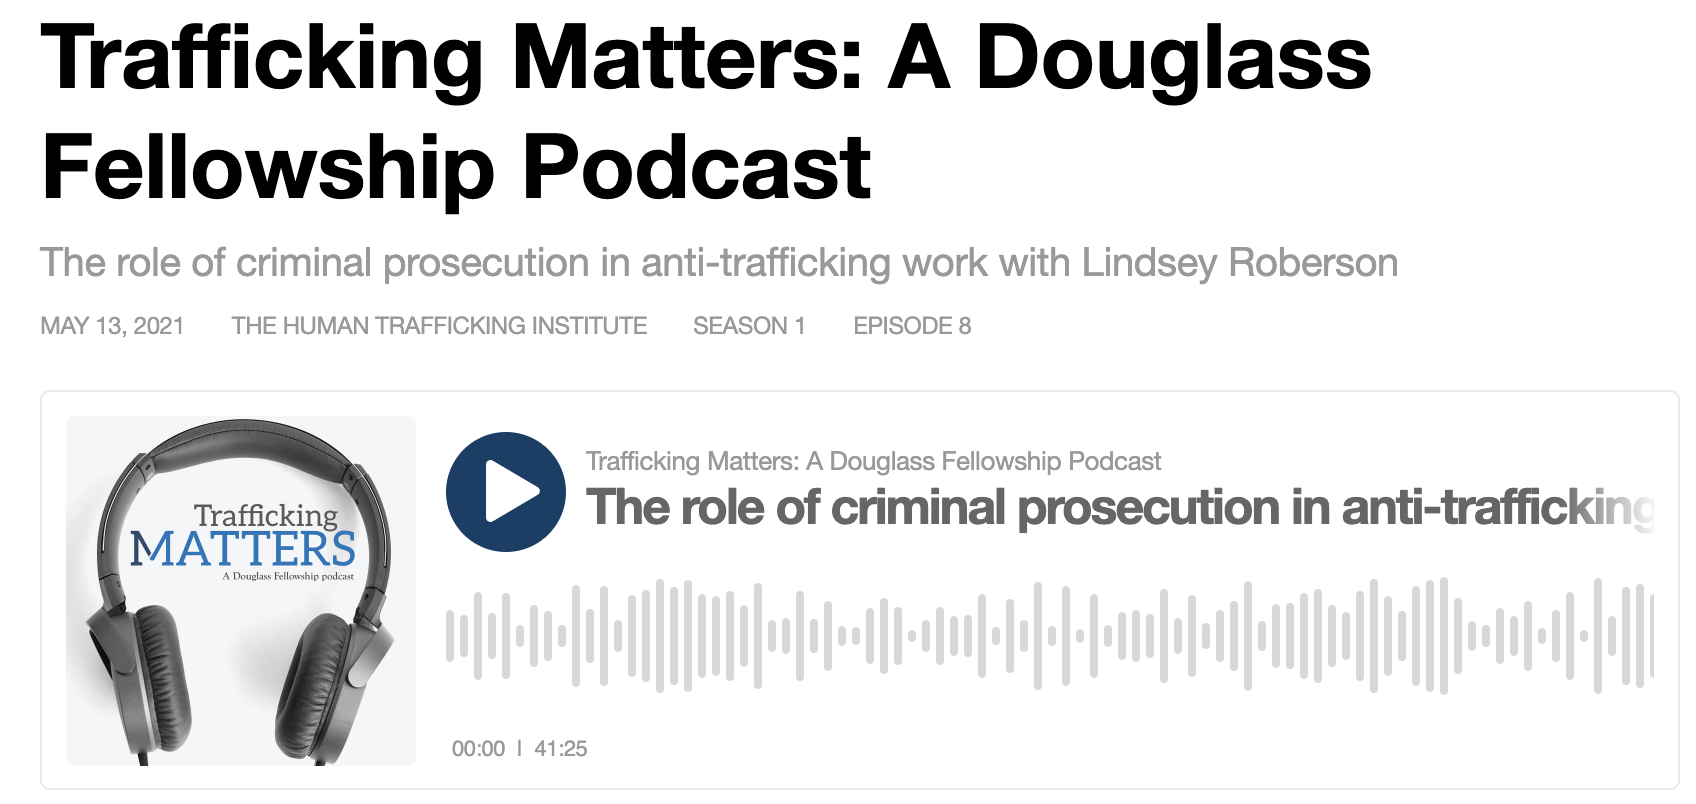 The Role of Criminal Prosecution in Anti-Trafficking Work